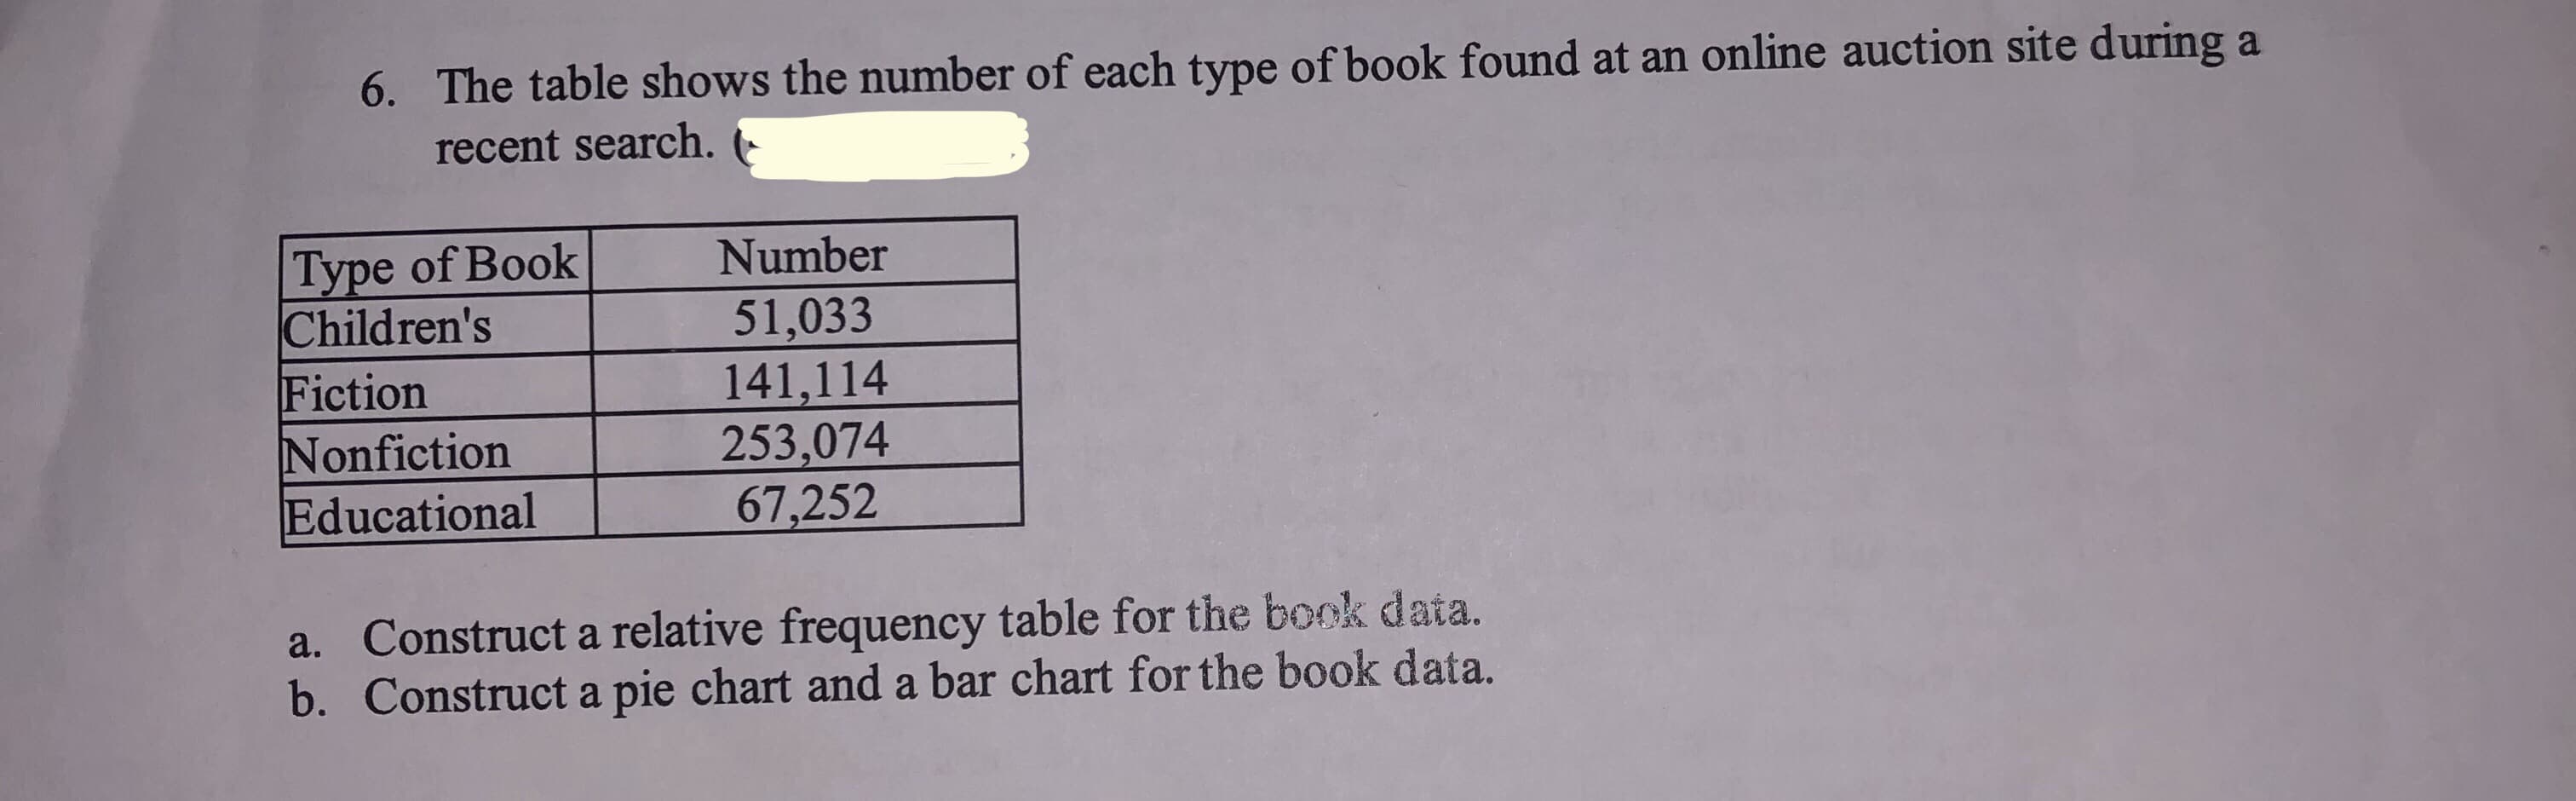 6. The table shows the number of each type of book found at an online auction site during a
recent search. (
Type of Book
Children's
Fiction
Nonfiction
Educational
Number
51,033
141,114
253,074
67,252
a. Construct a relative frequency table for the book data.
b. Construct a pie chart and a bar chart for the book data.
